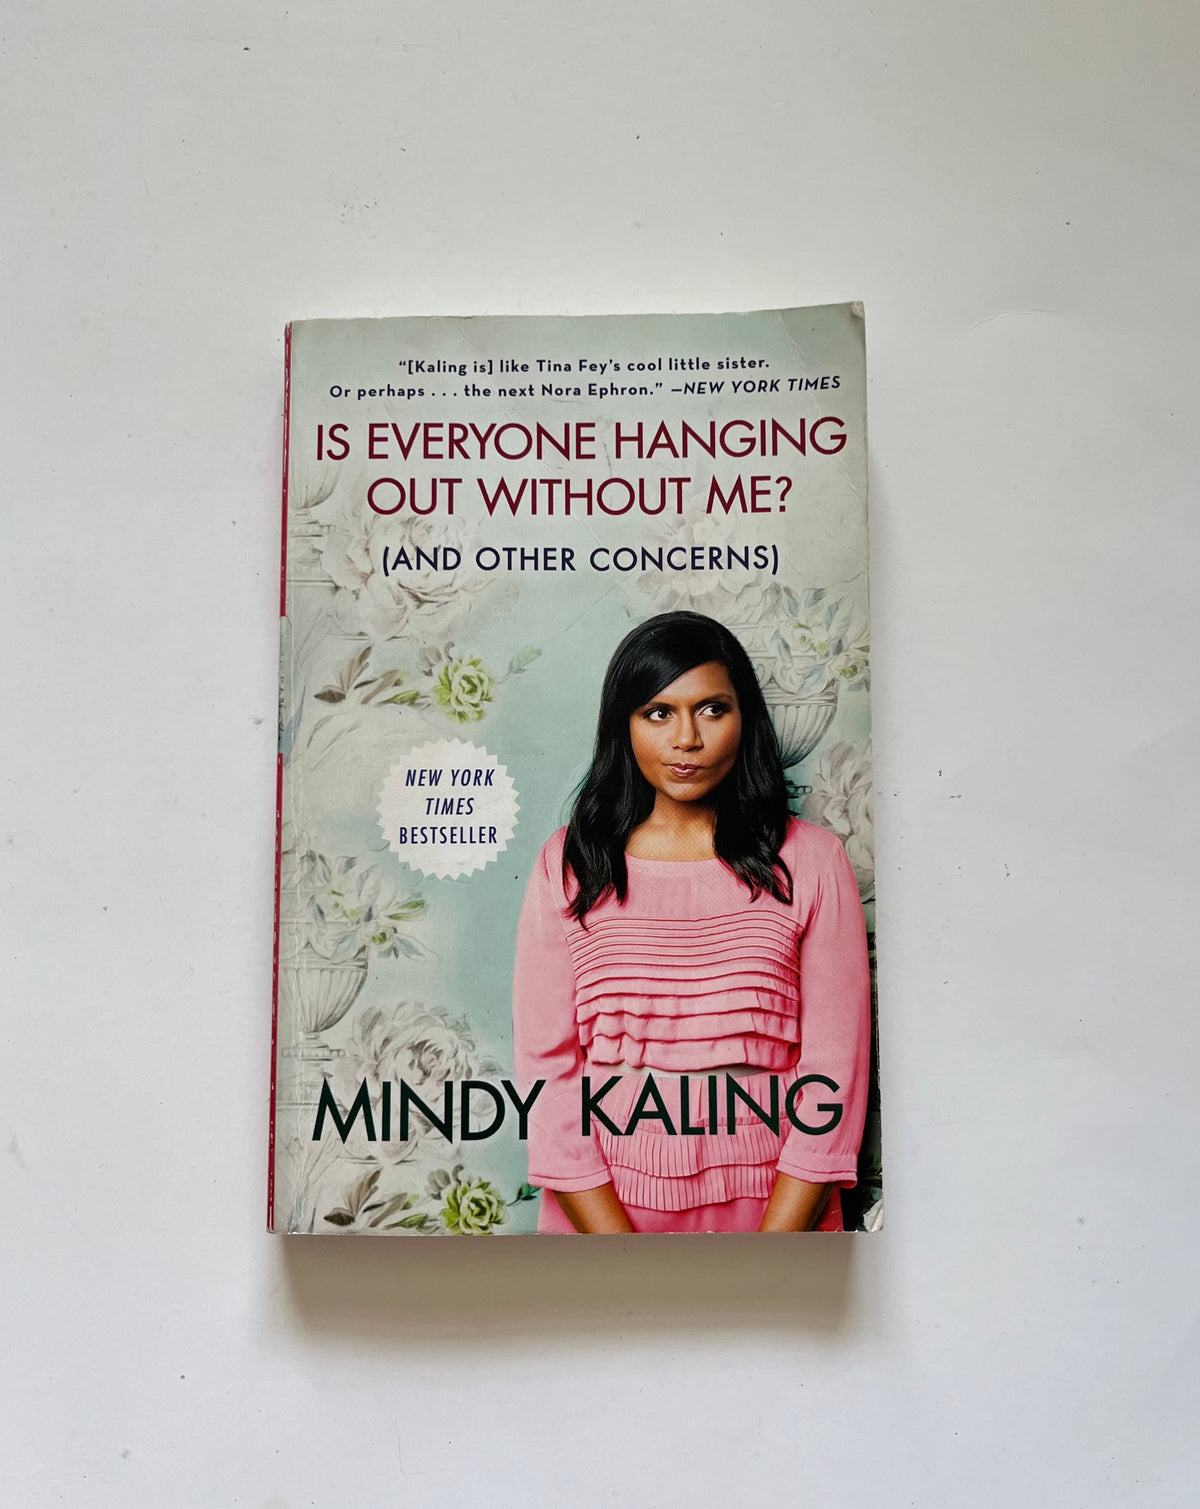 Everyone Hanging Out Without Me? (And Other Concerns) by Mindy Kaling